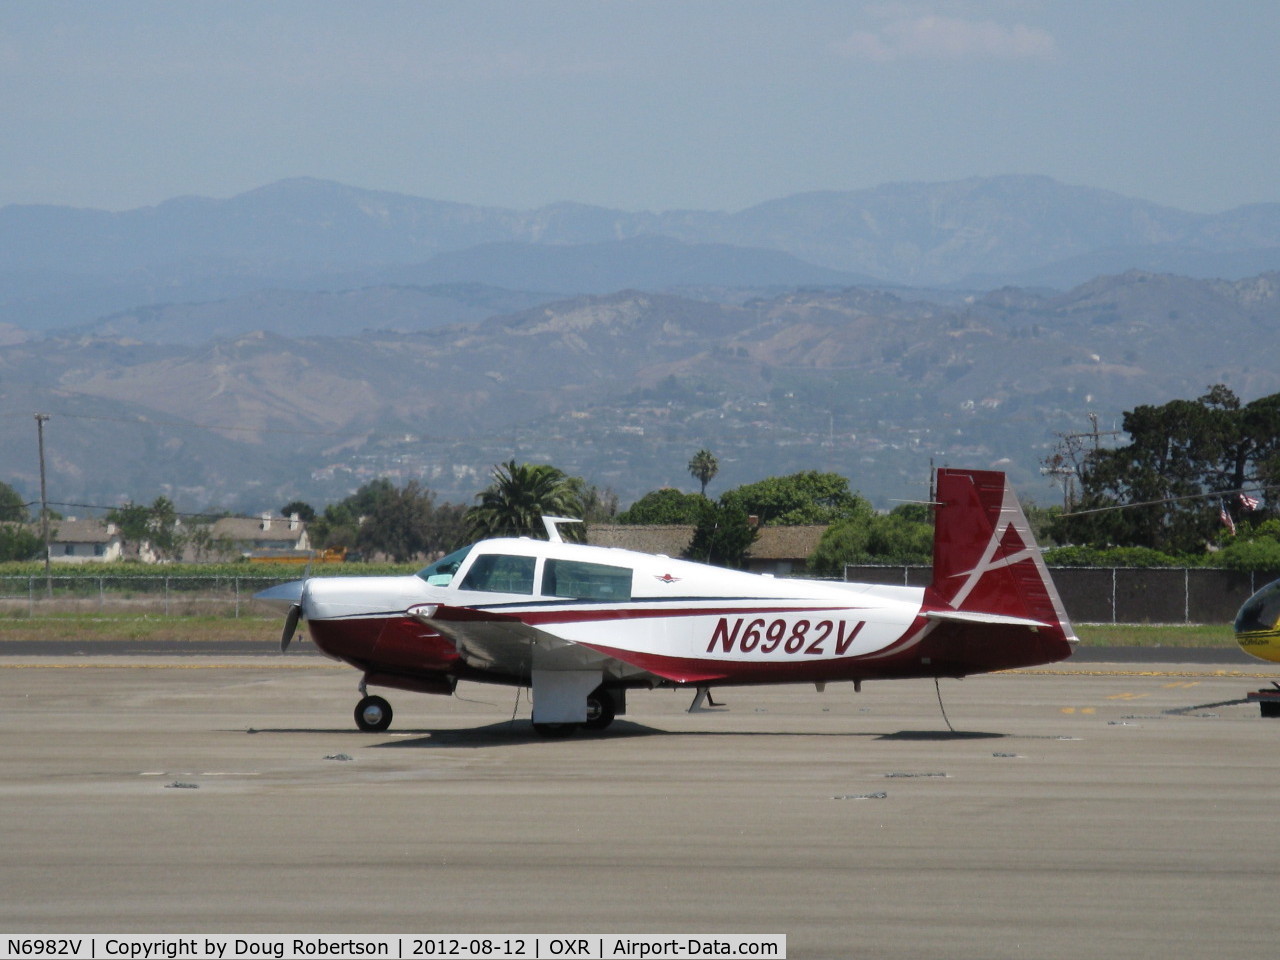 N6982V, 1976 Mooney M20F Executive C/N 22-1344, 1976 Mooney M20F EXECUTIVE, Lycoming IO-360-A1A 200 Hp, better uncluttered photo showing beautiful refinish.